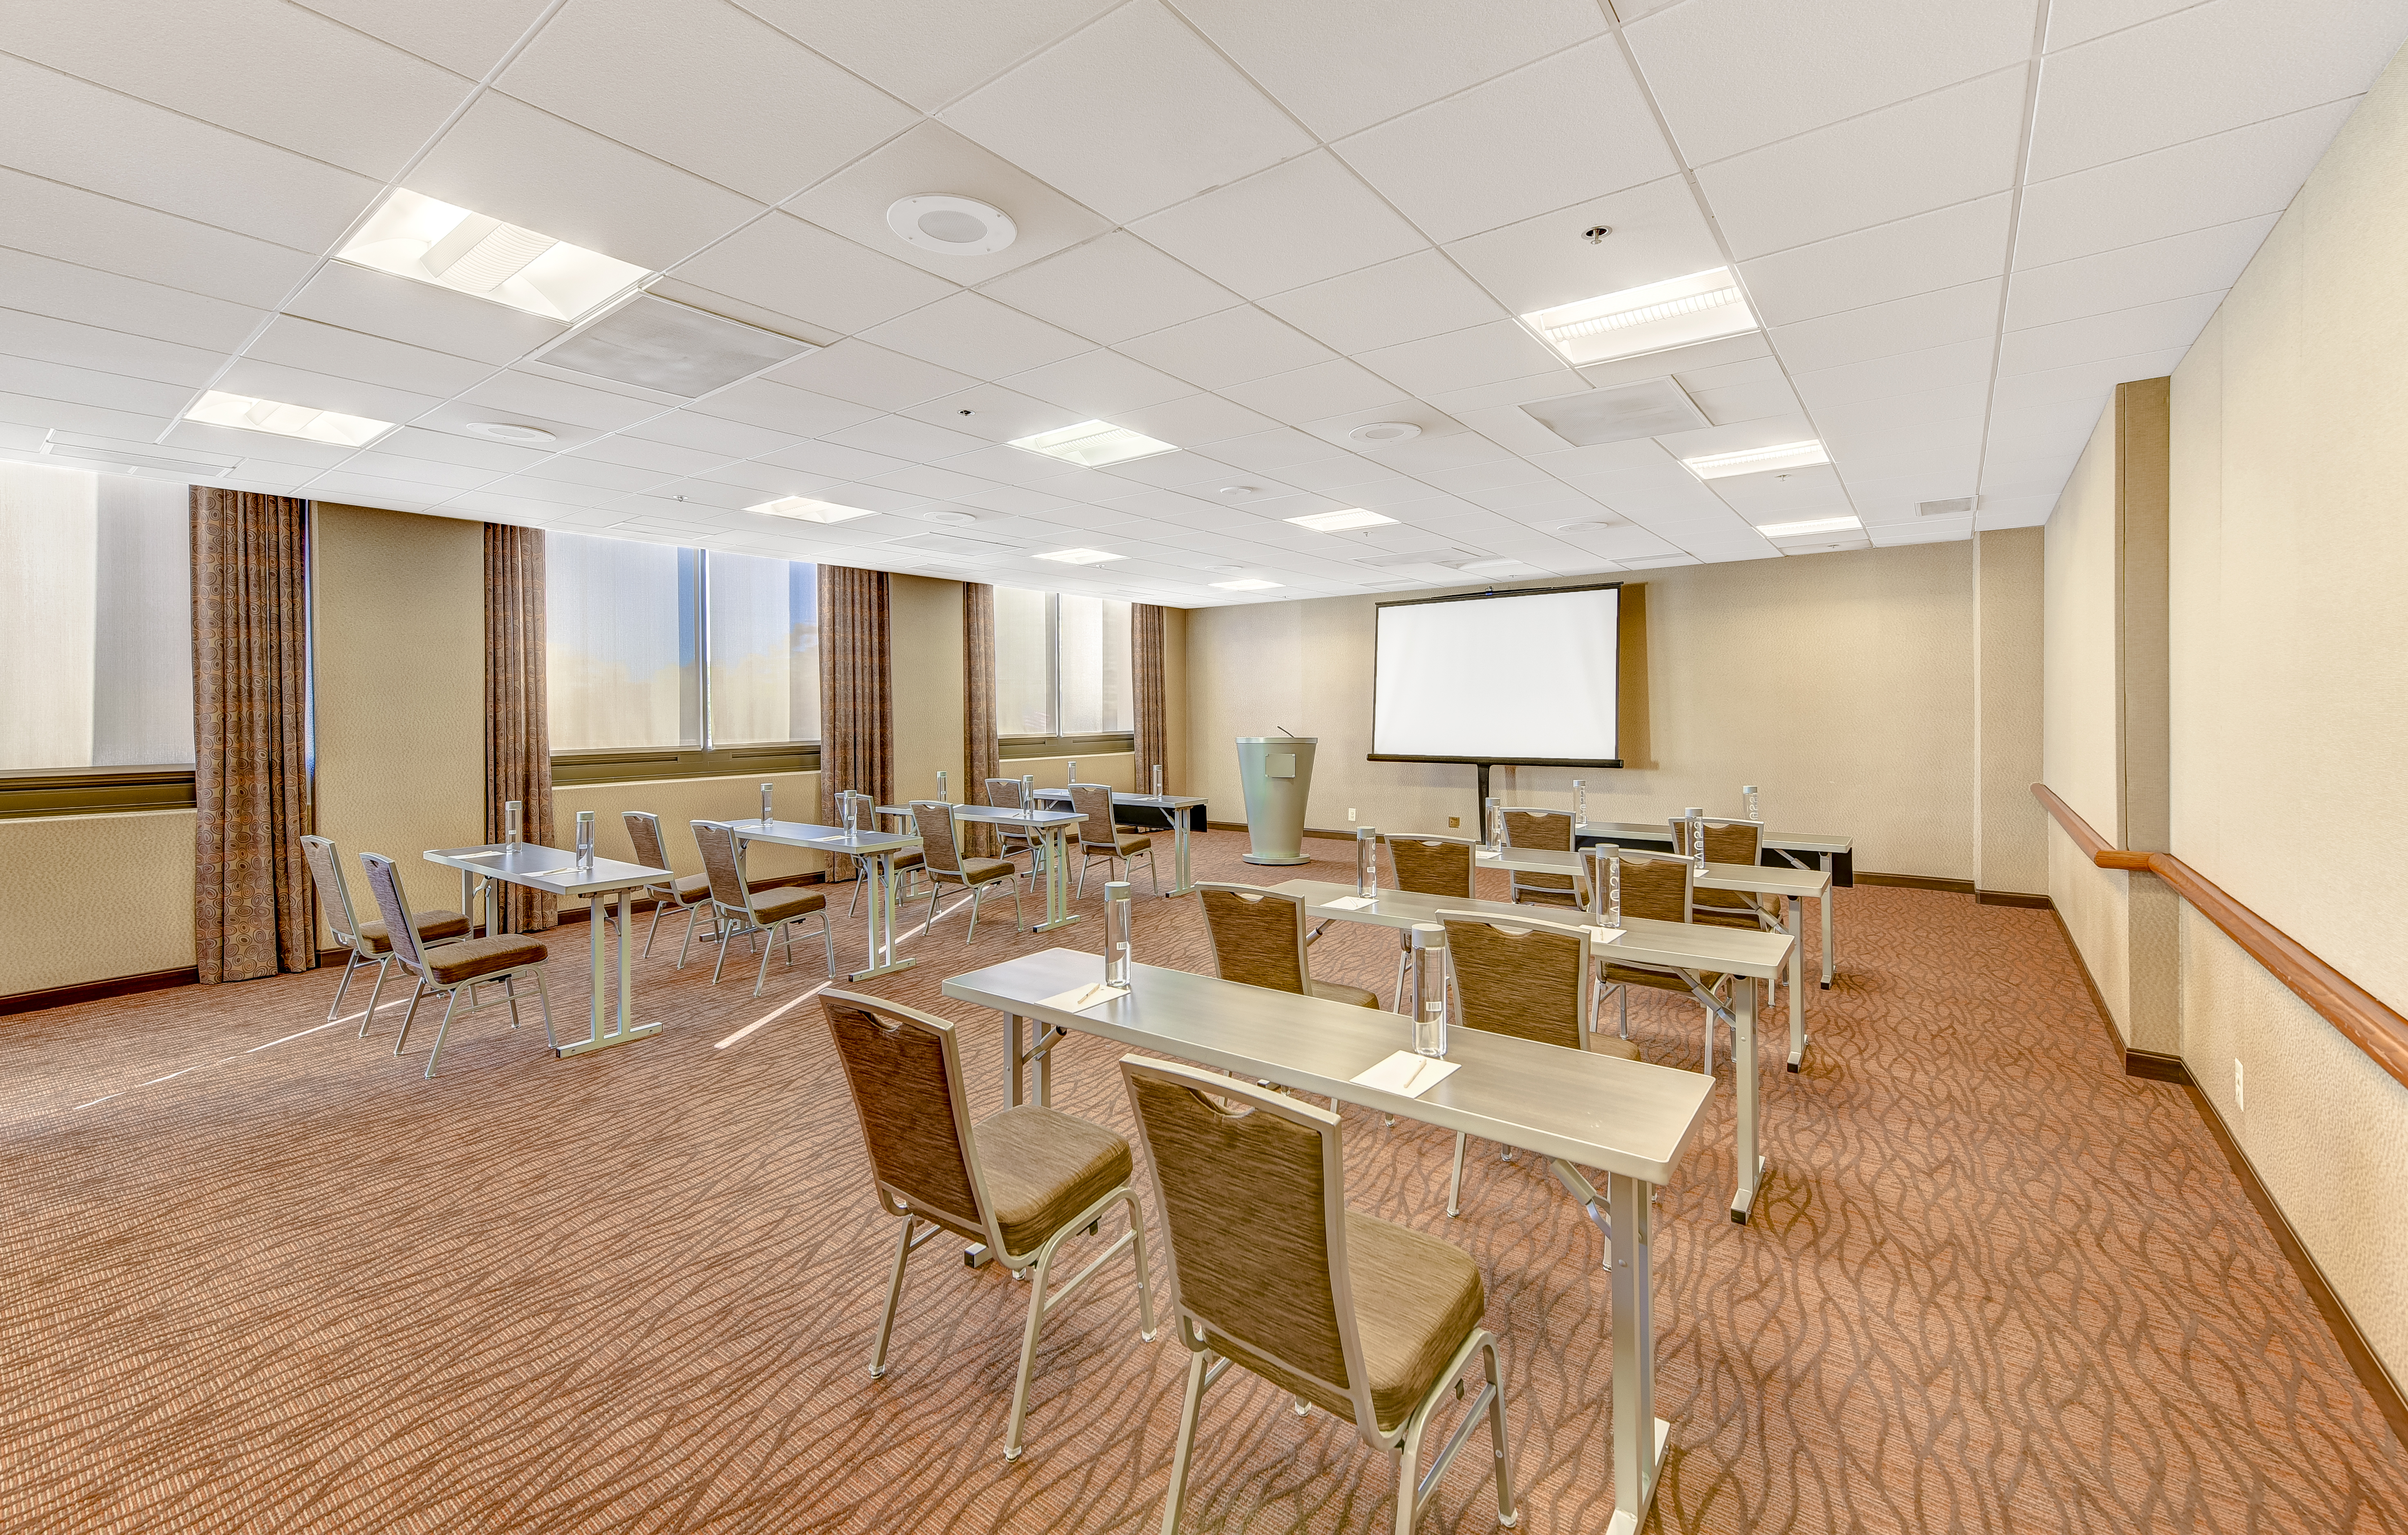 Classroom-Style Tables in Lassen Room